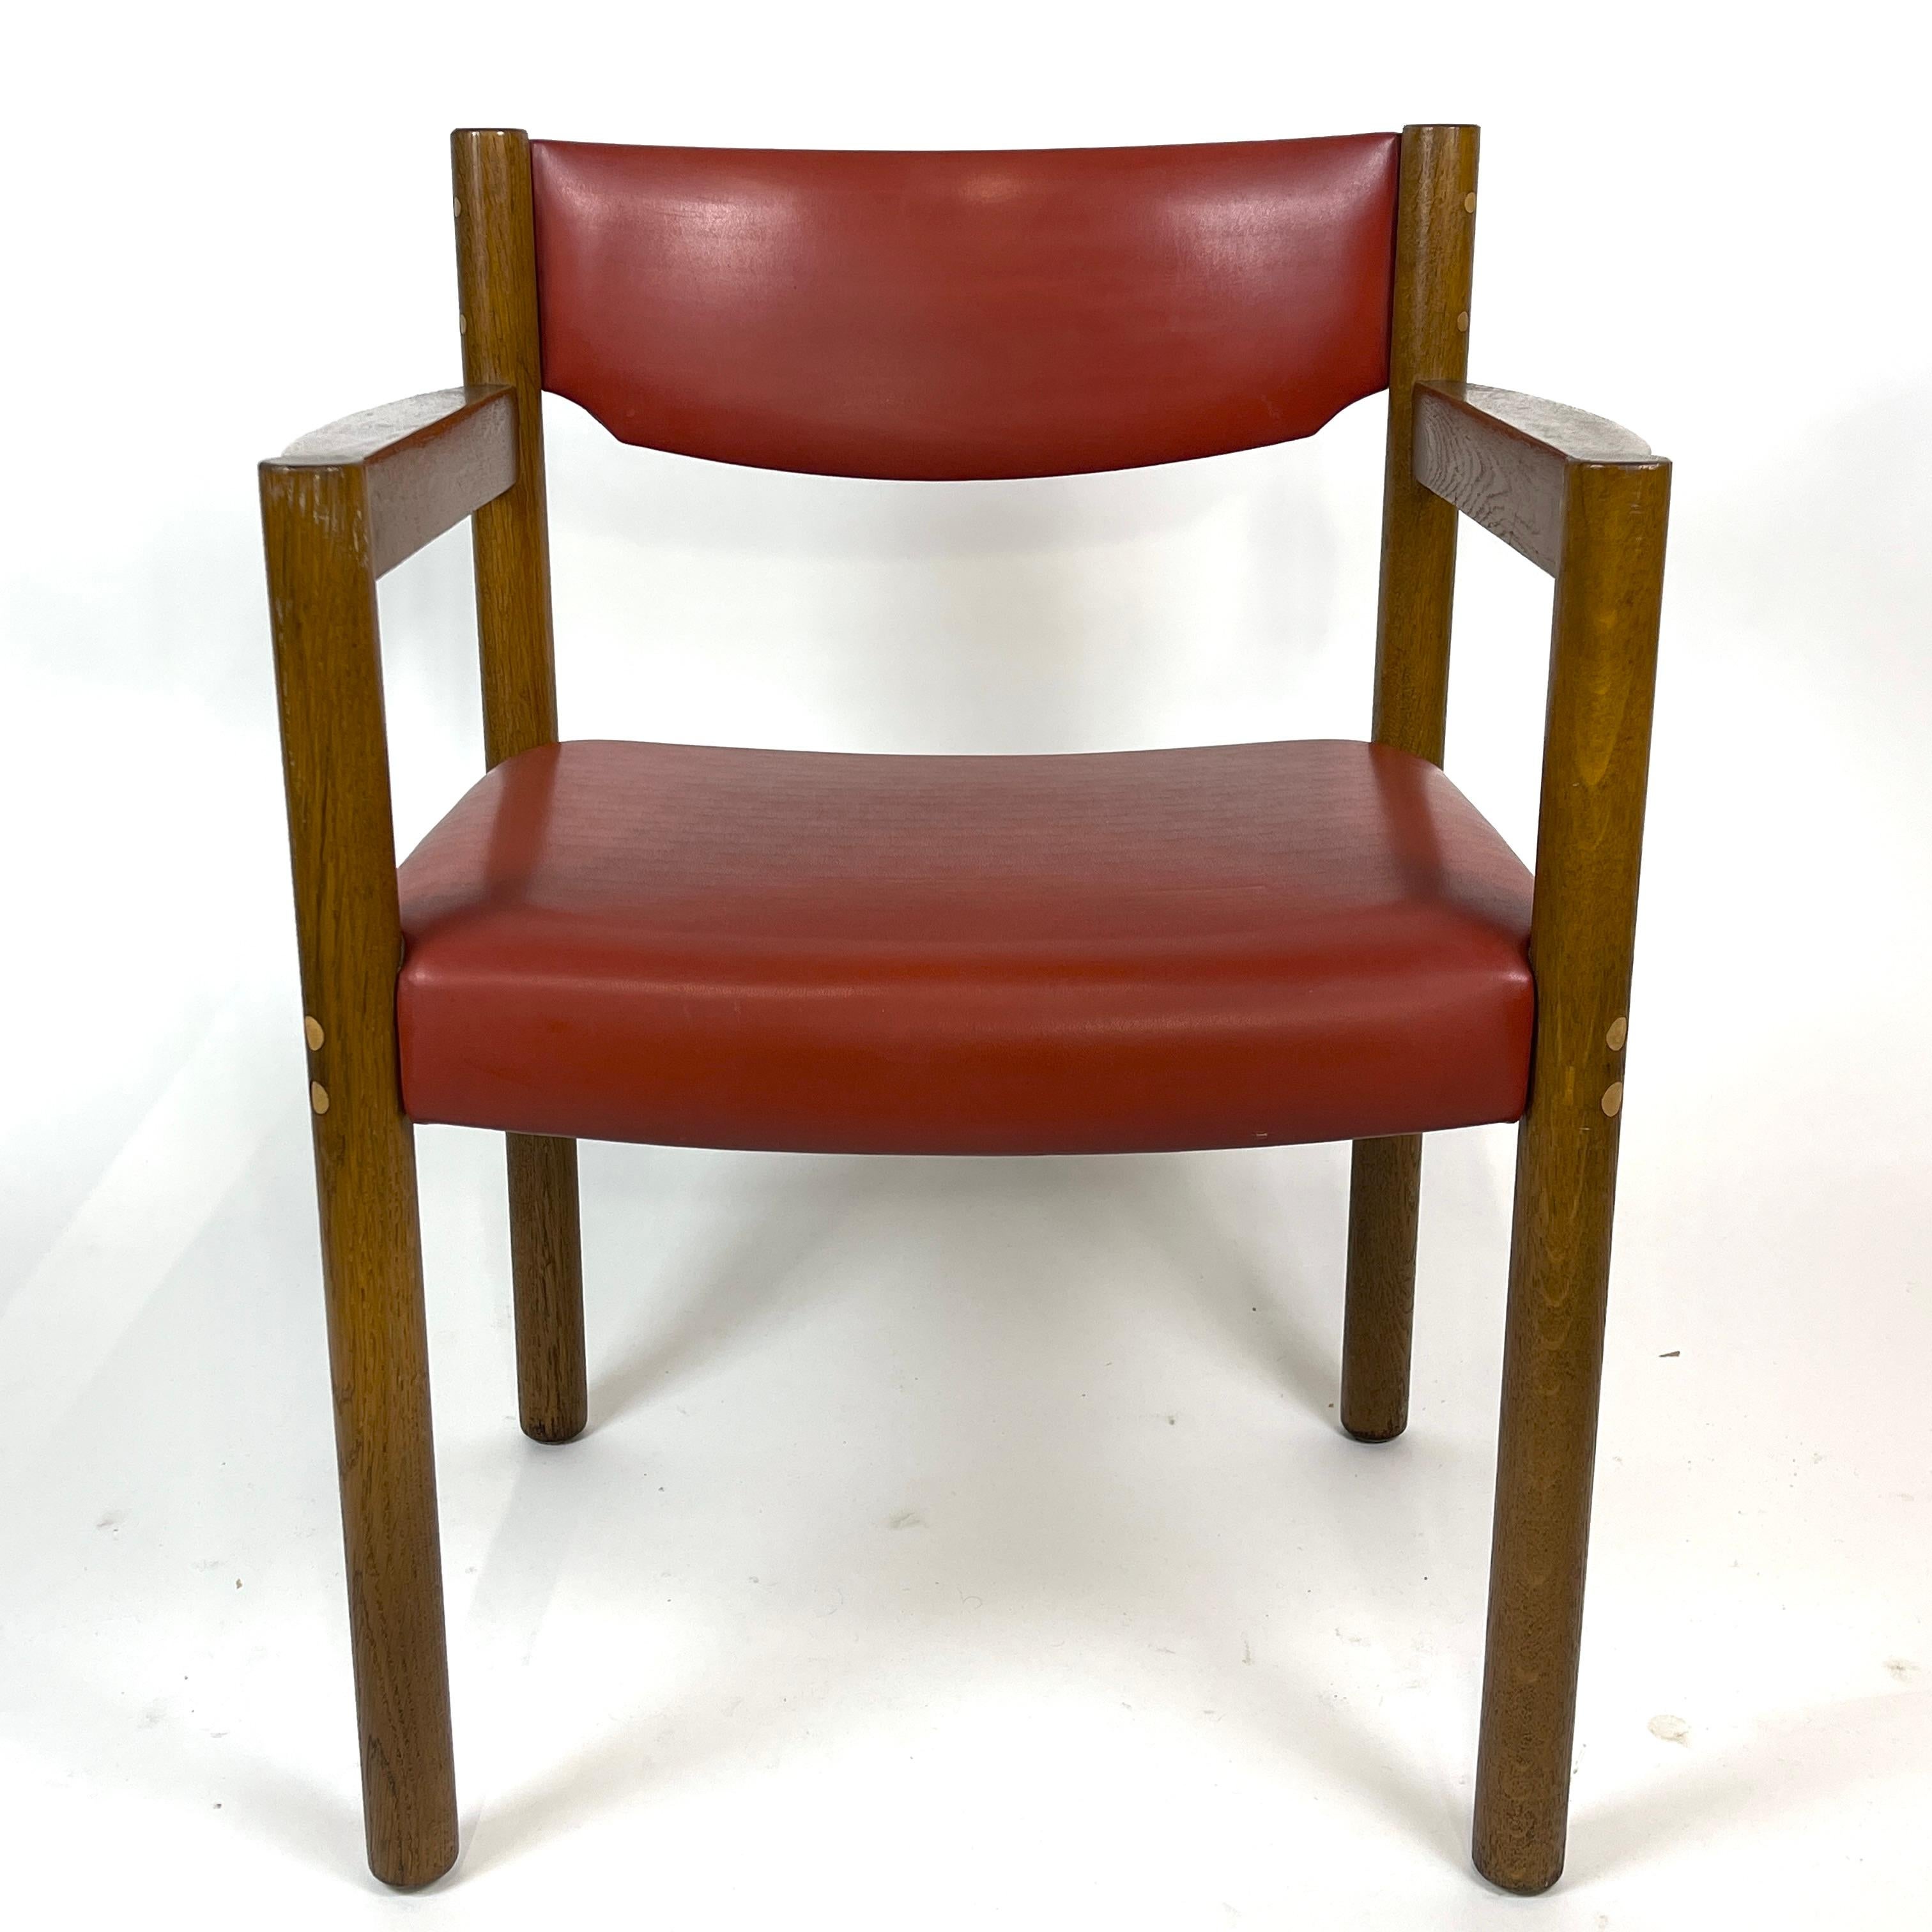 Rare and Excellent Harvey Probber Oak and Leather Arm Chair In Good Condition For Sale In Hudson, NY